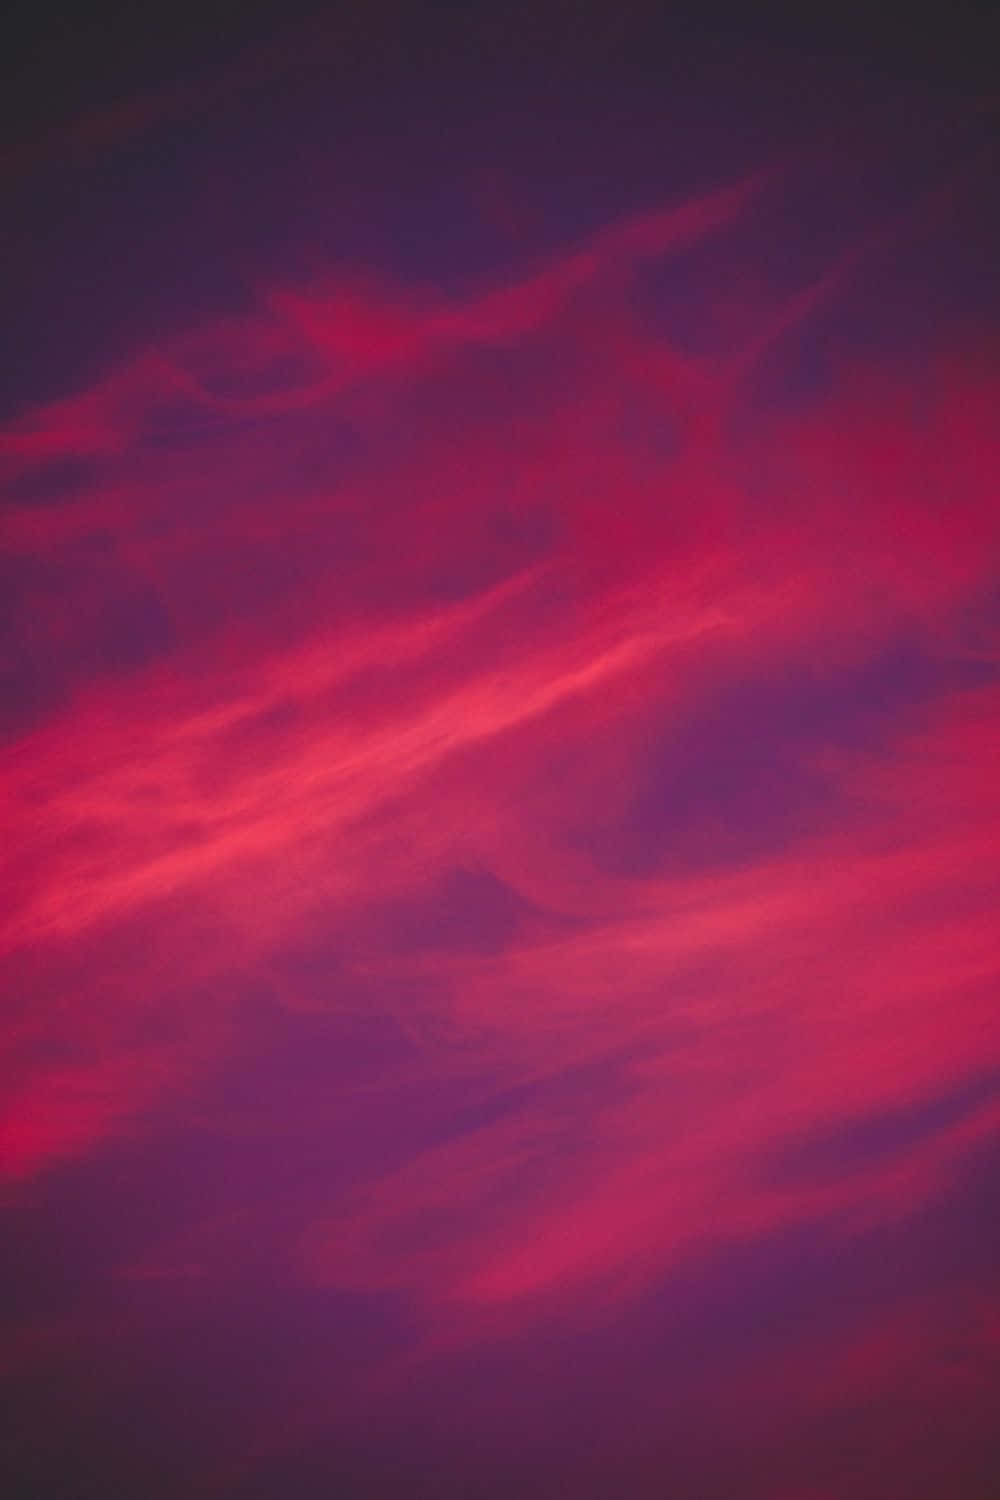 Sky & Cloud In Red And Purple Background